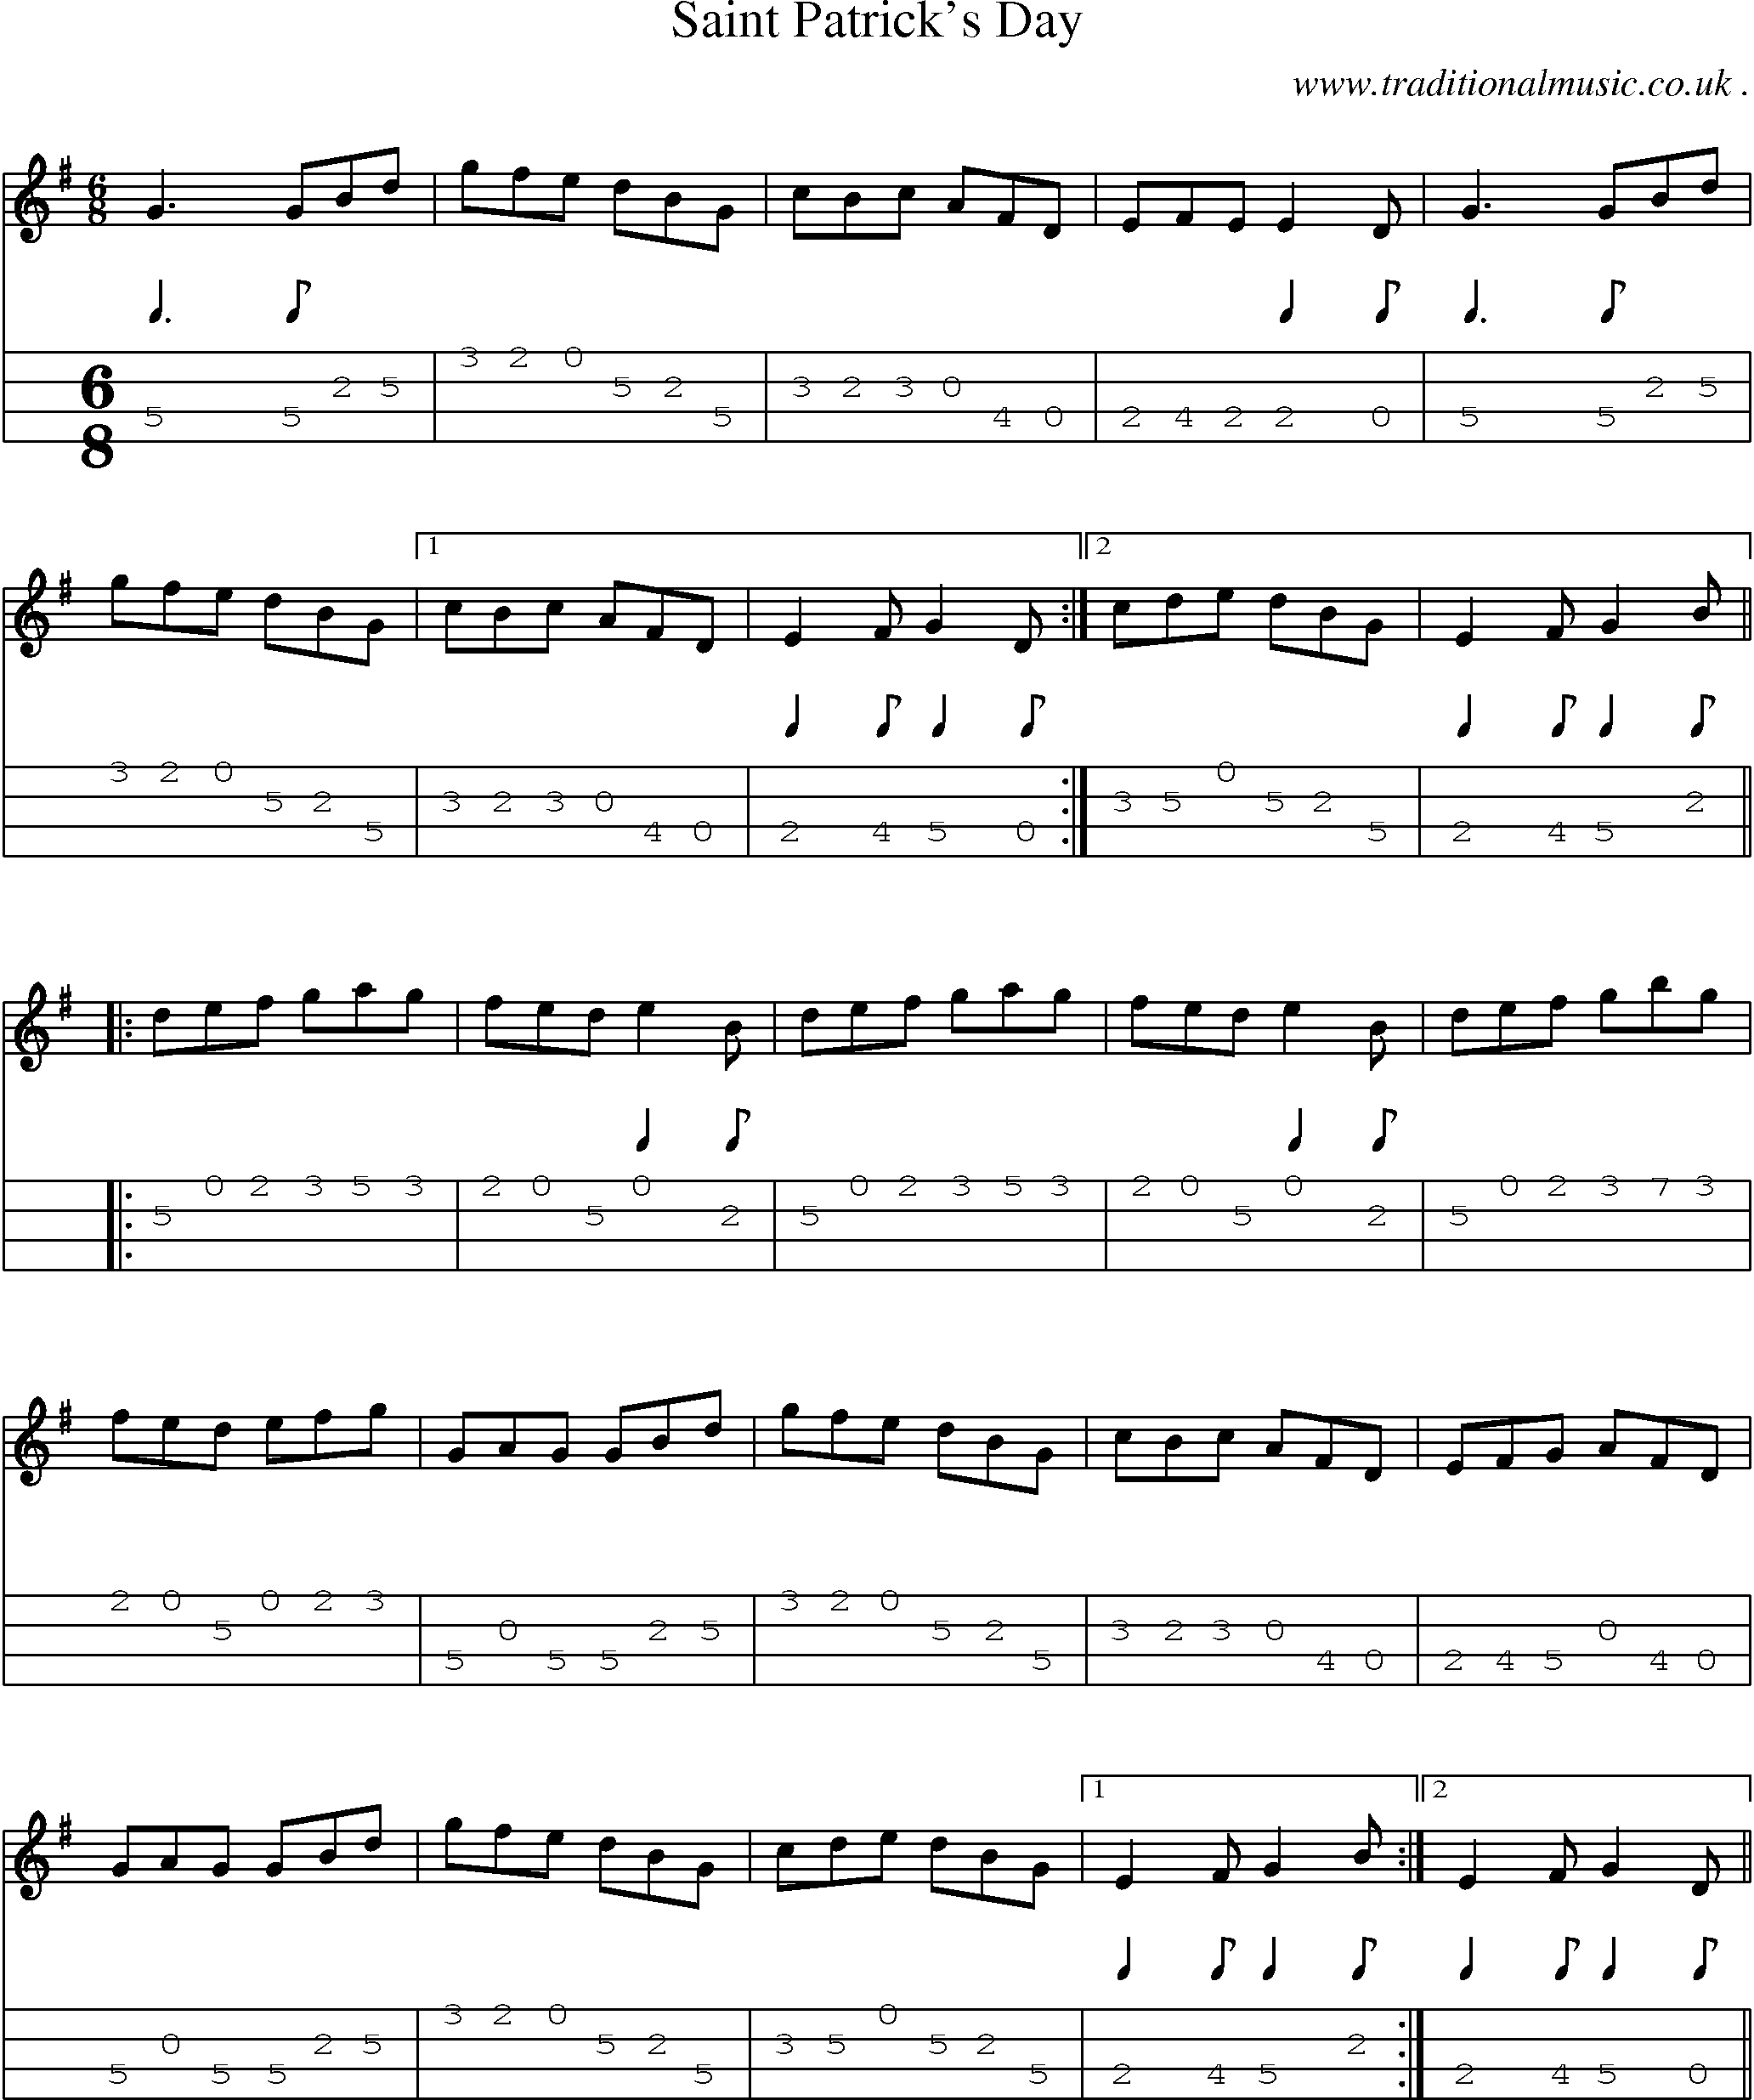 Music Score and Guitar Tabs for Saint Patricks Day